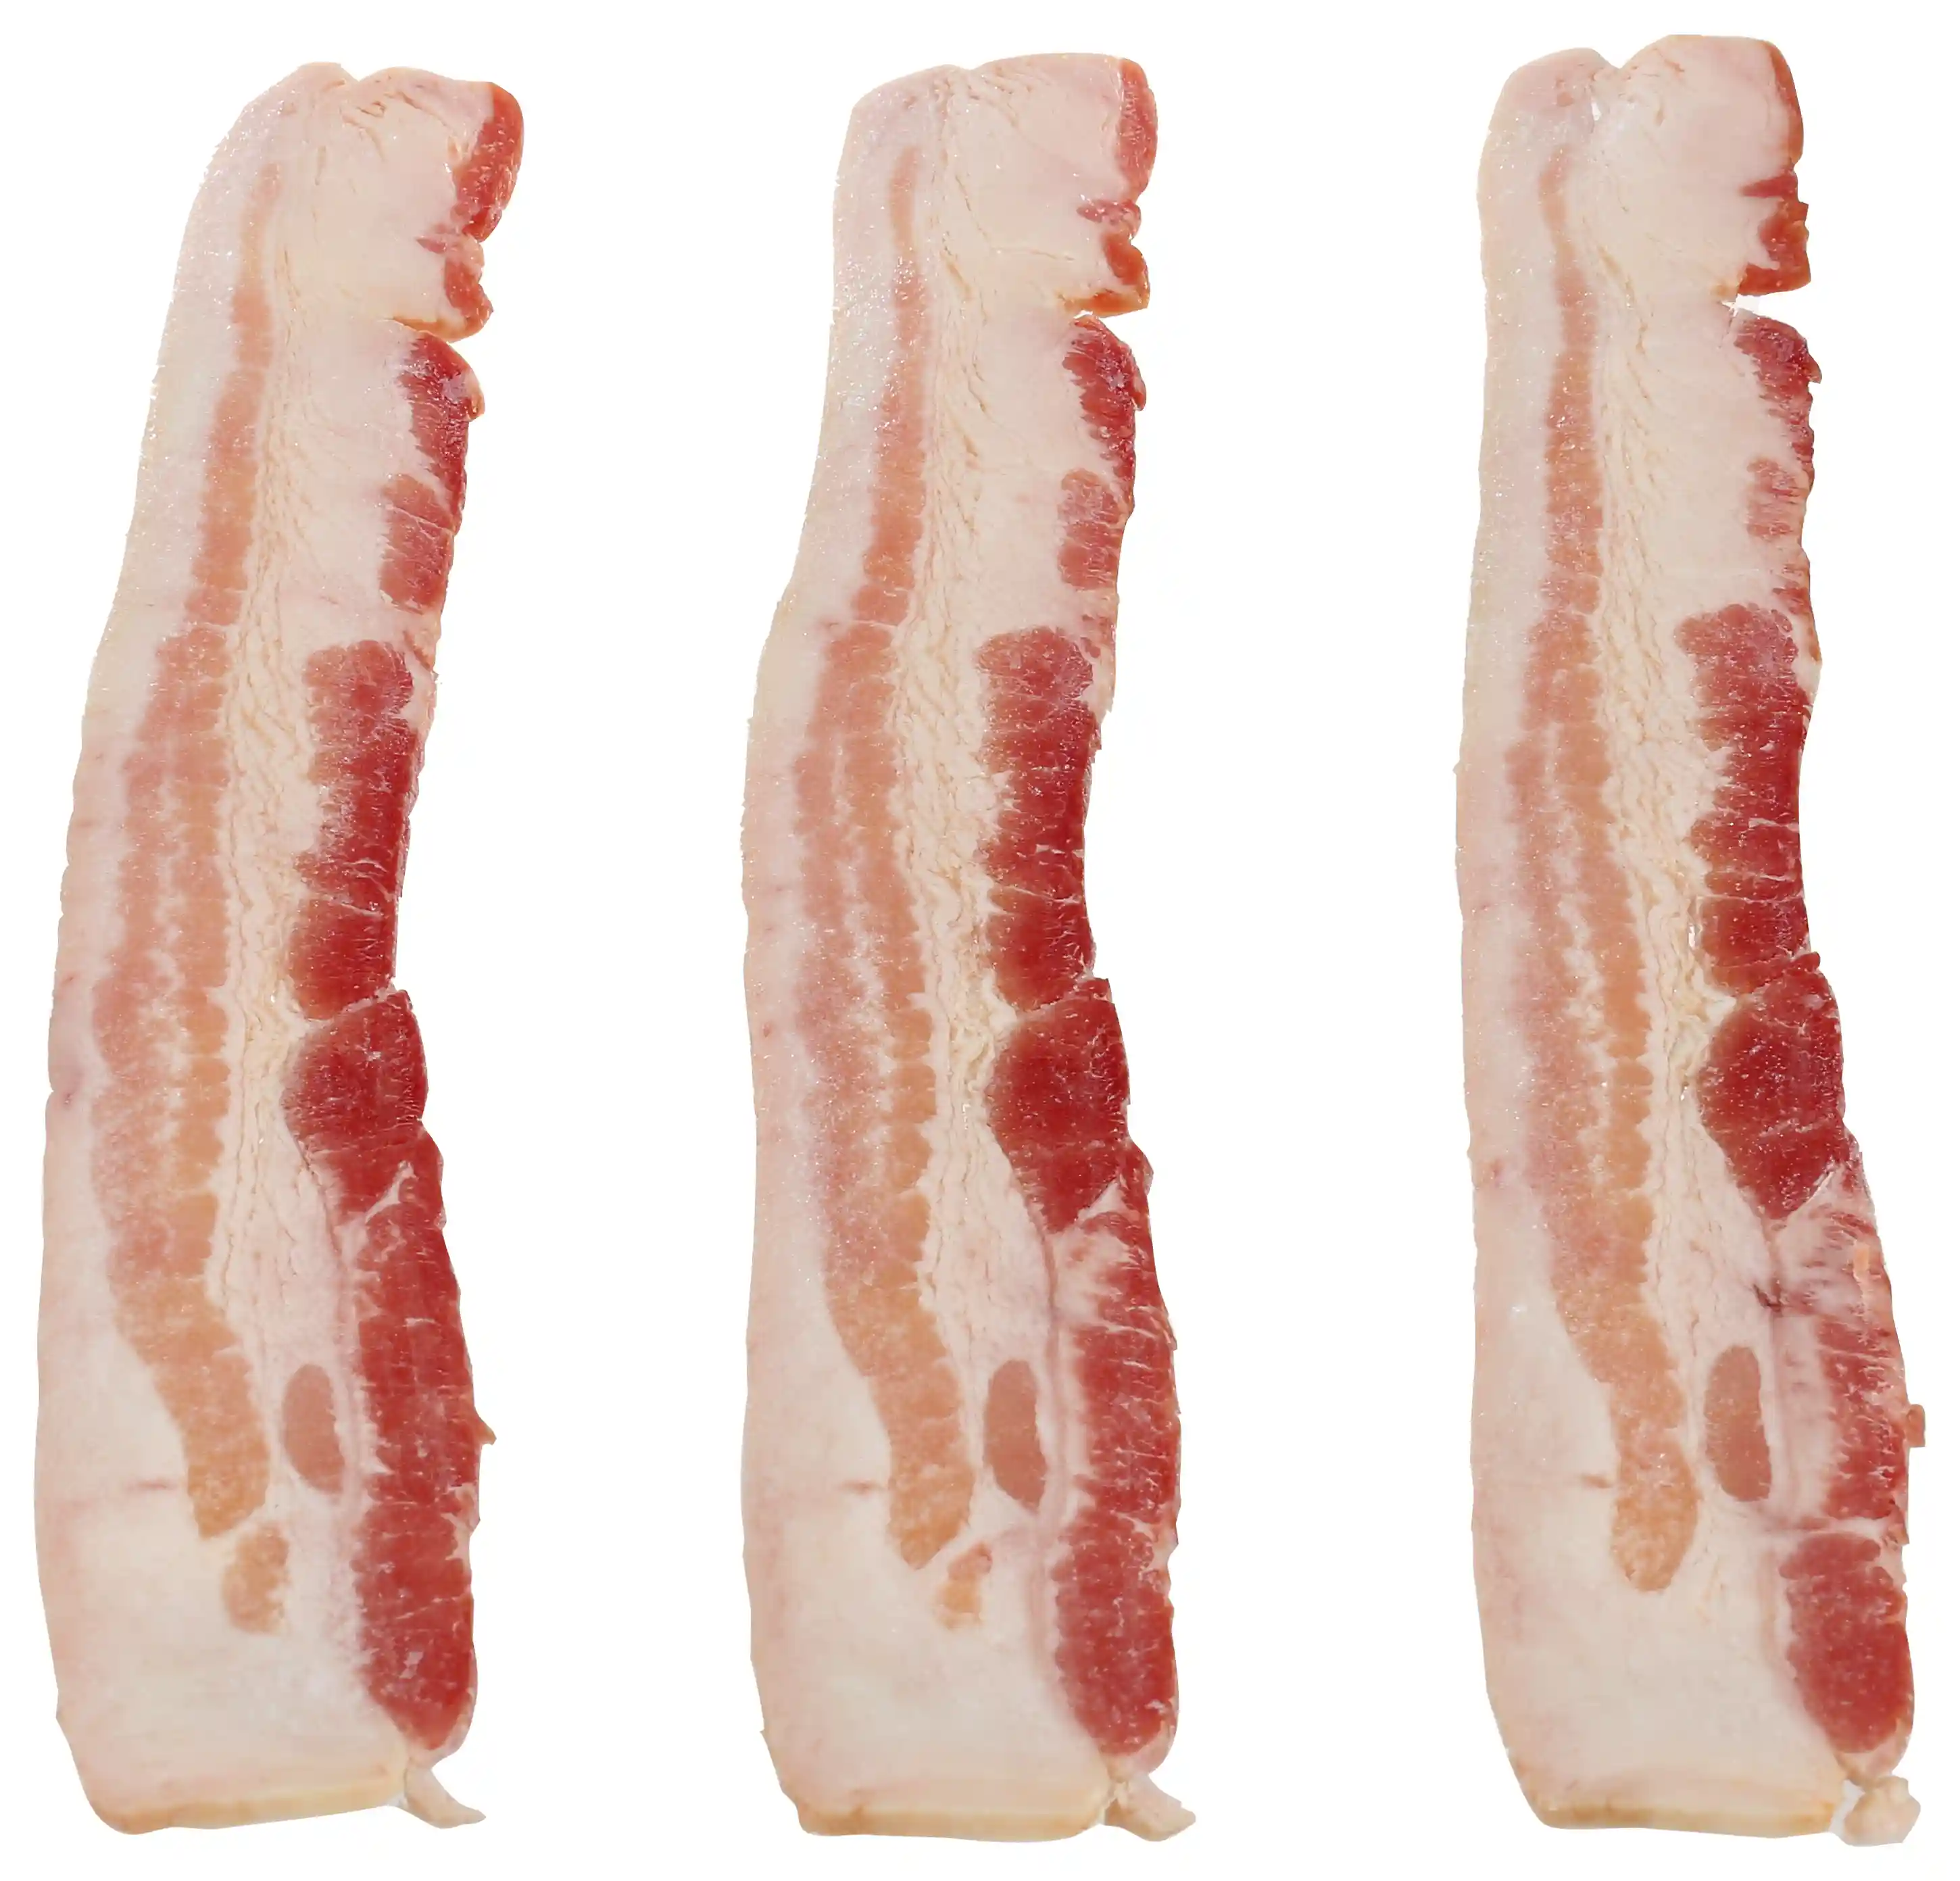 Wright® Brand Naturally Hickory Smoked Thick Sliced Bacon, Bulk, 30 Lbs, 10-14 Slices per Pound, Frozen_image_21